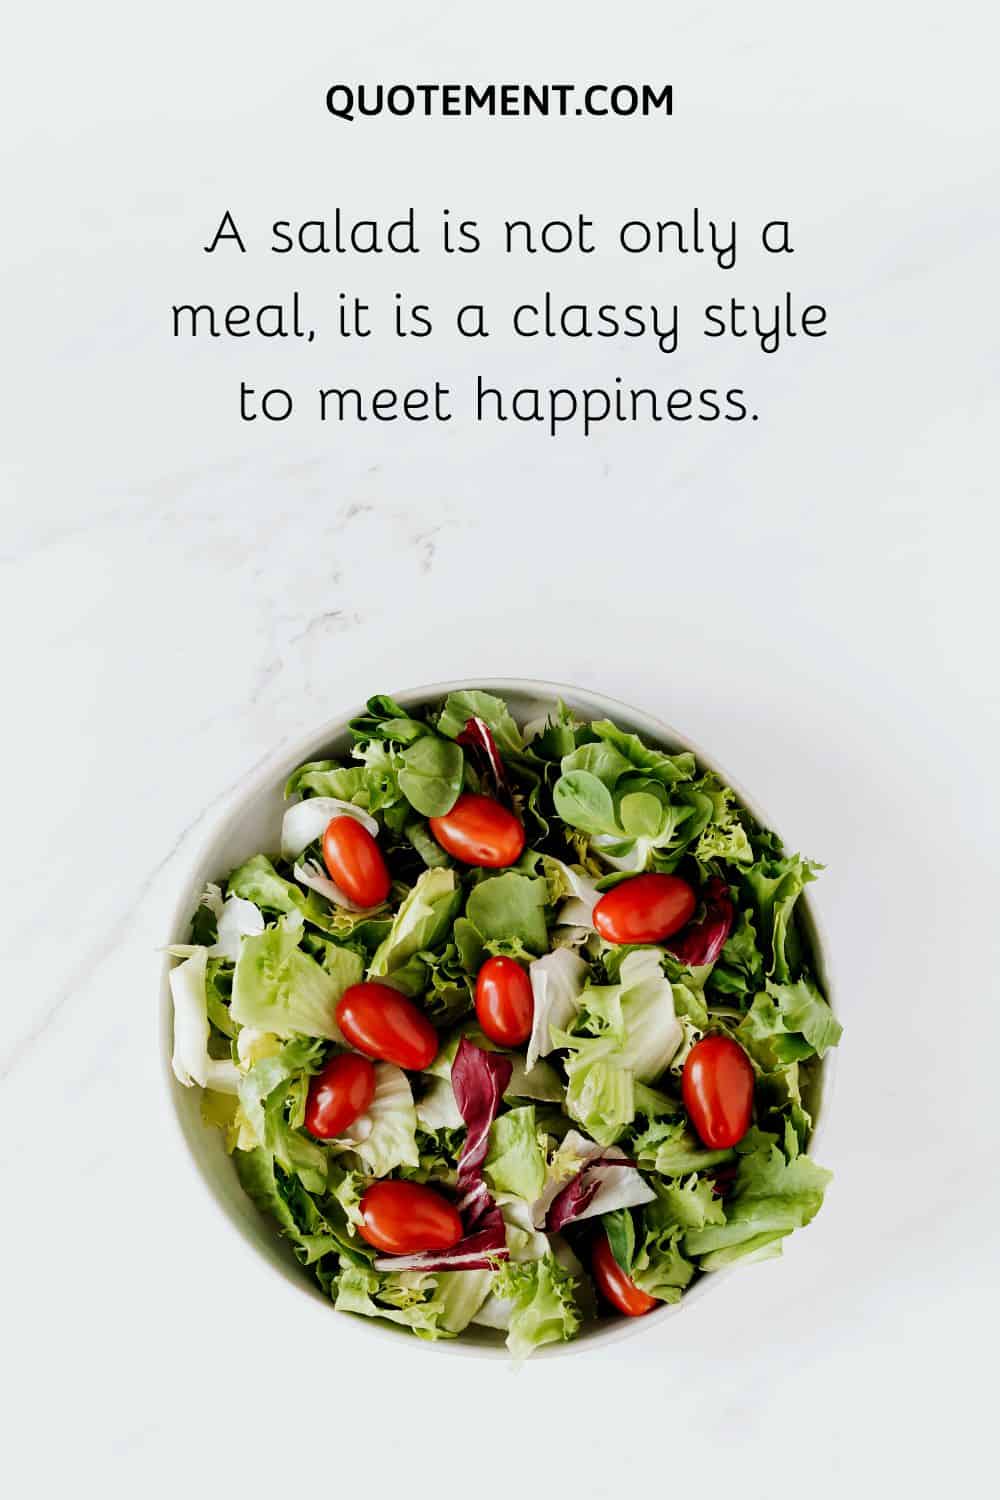 A salad is not only a meal